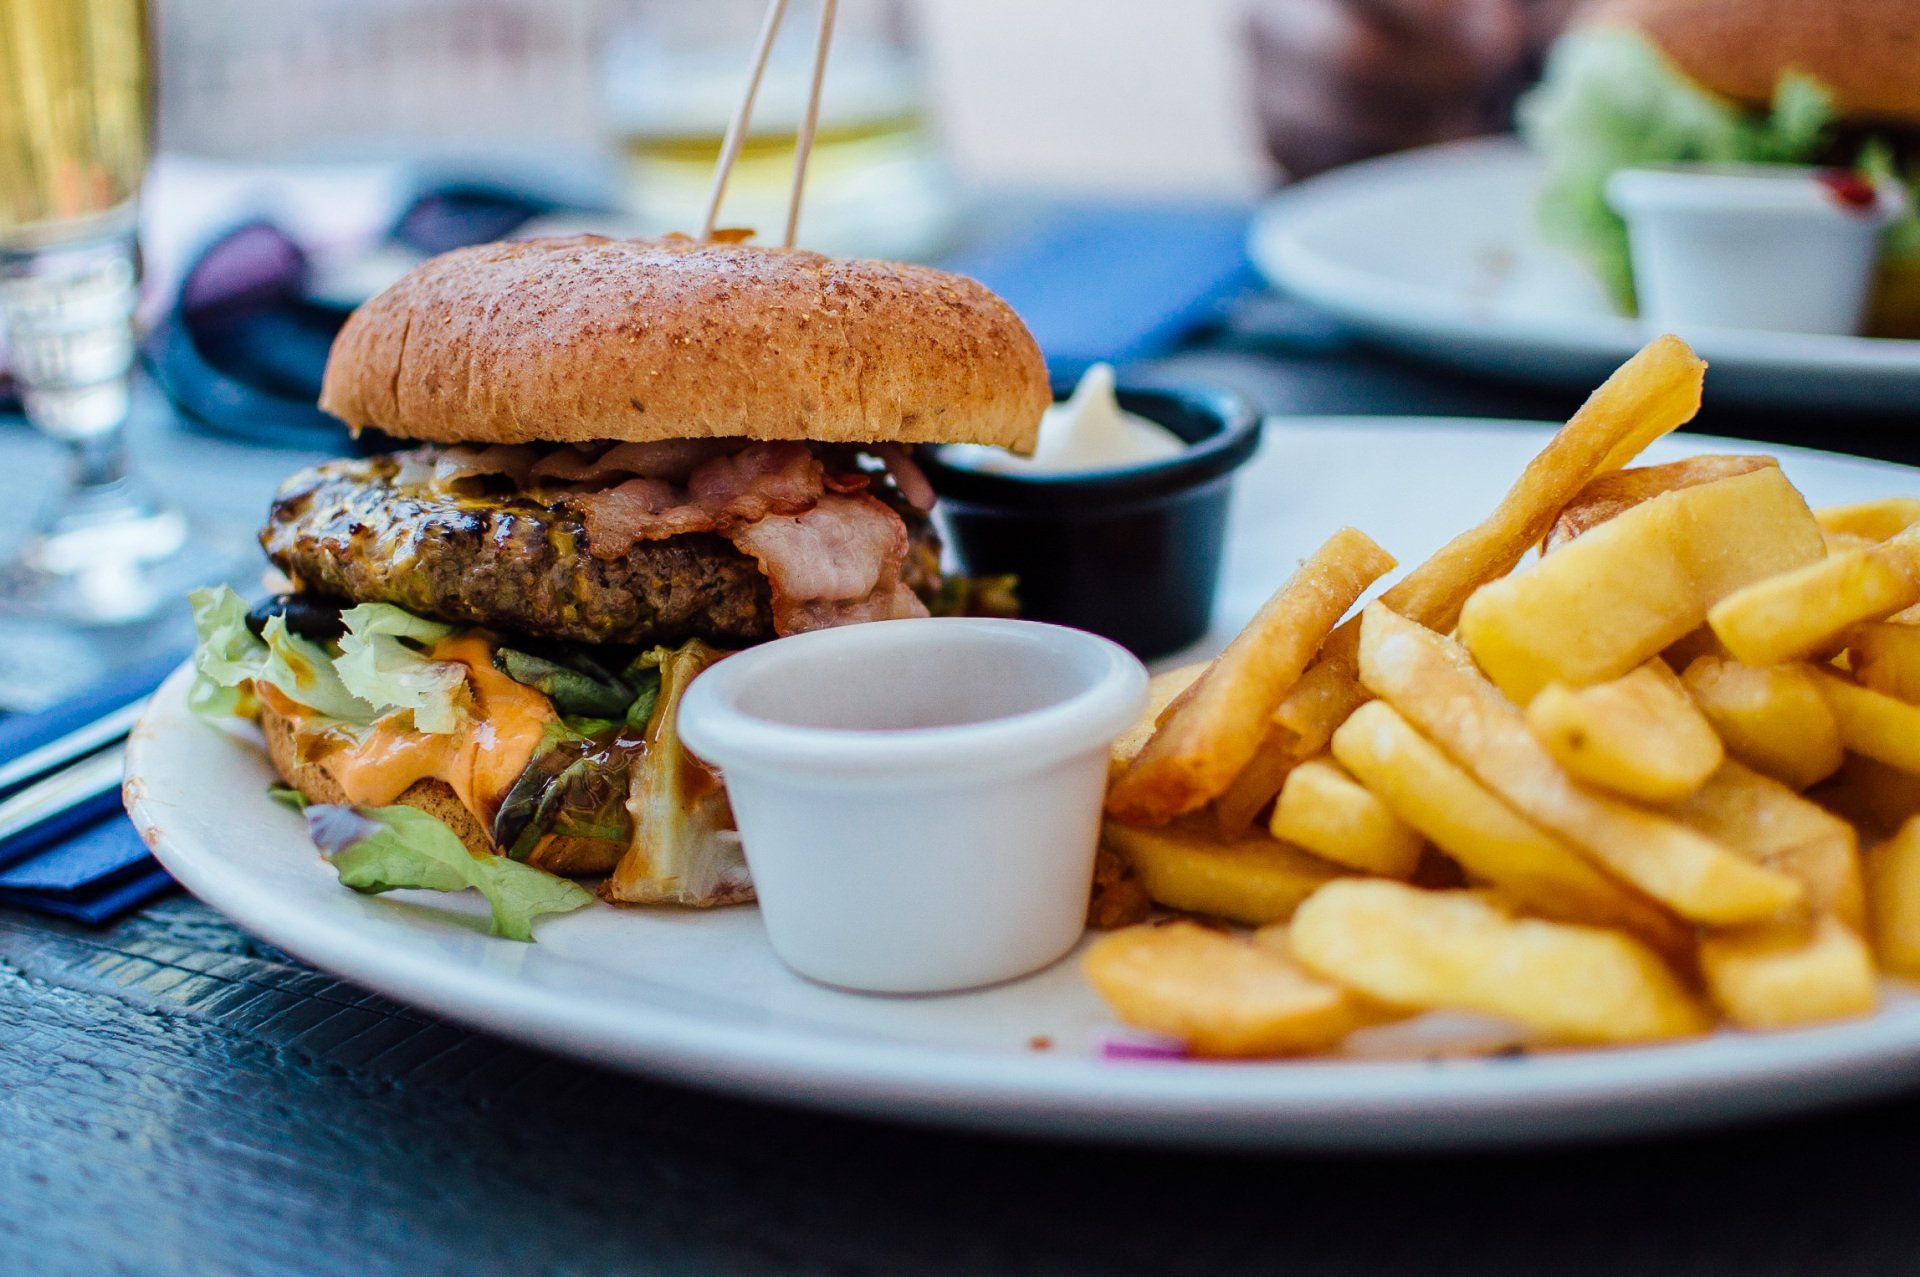 A plate of food with a hamburger and french fries on a table.